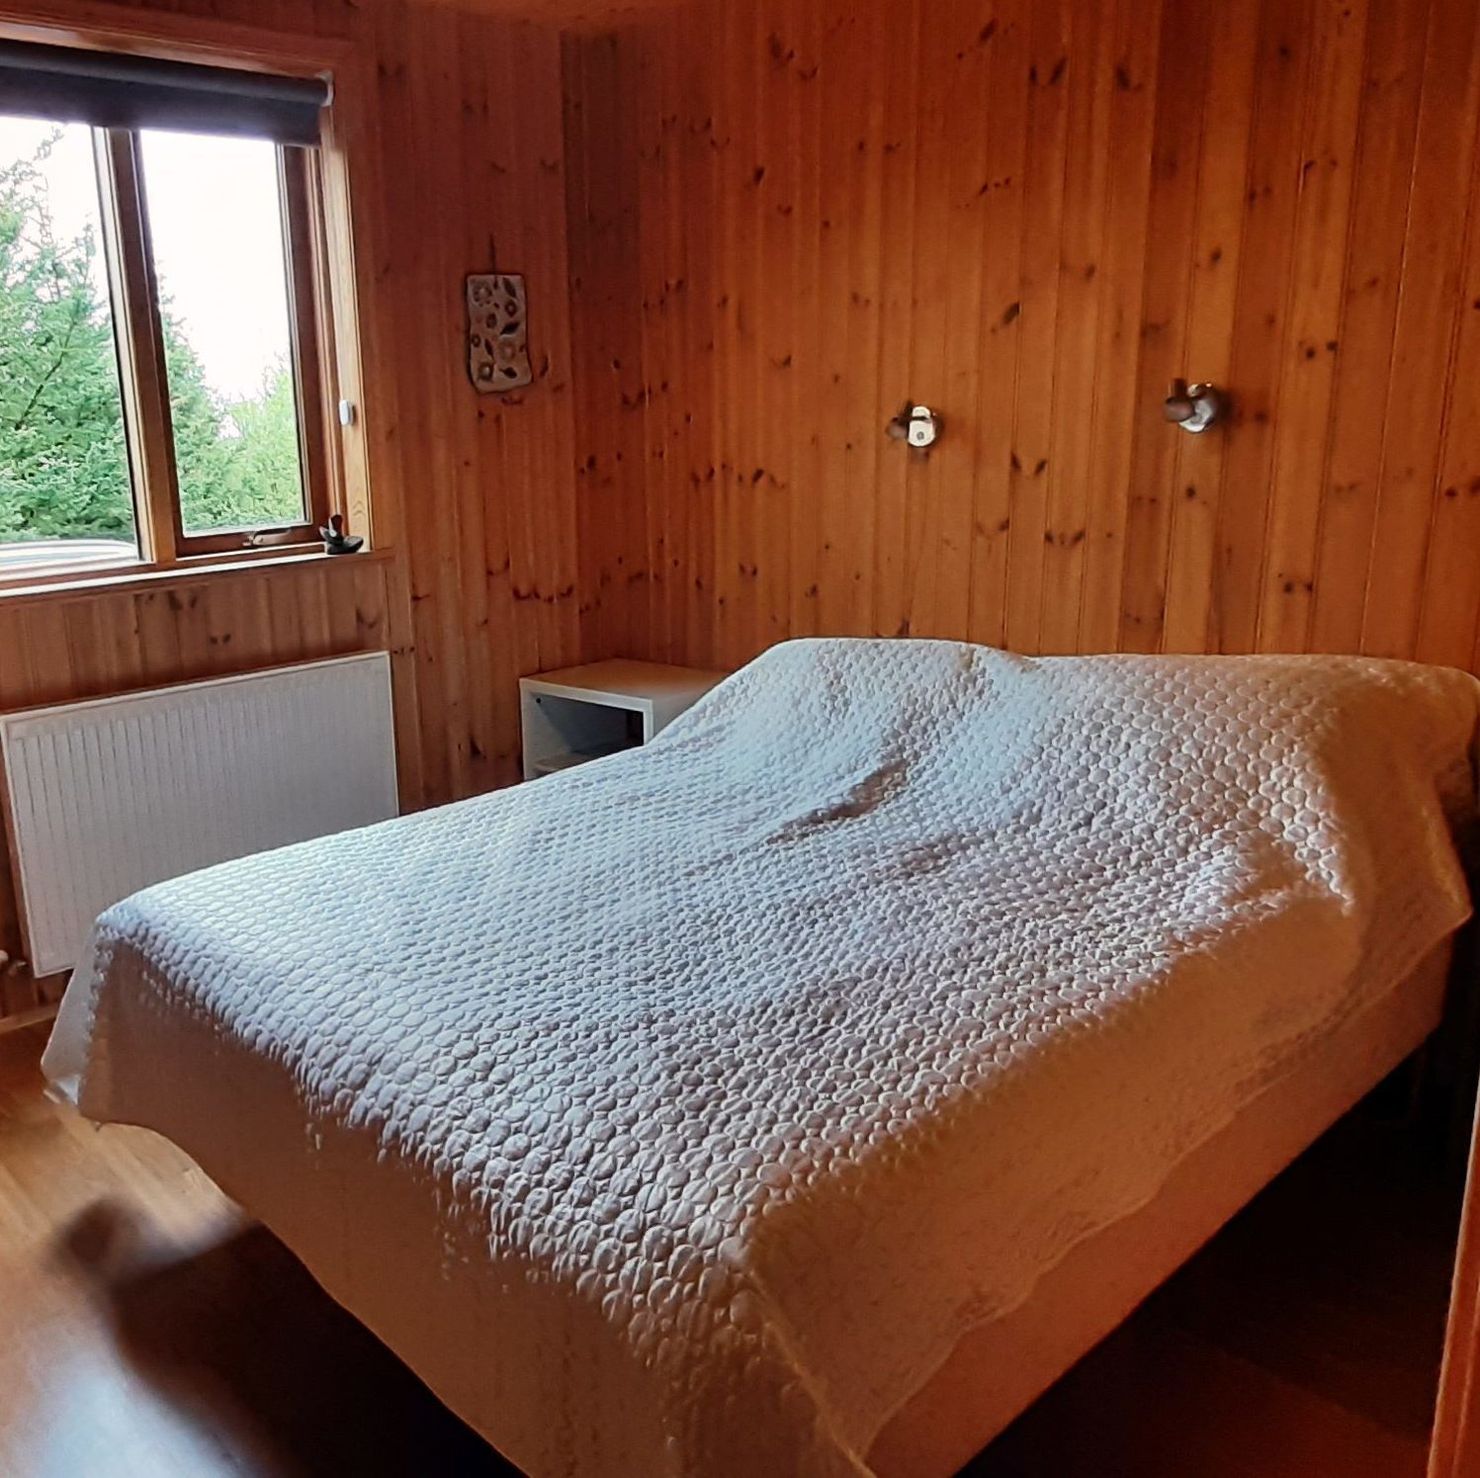 Bedroom with window, wardrobe and double bed